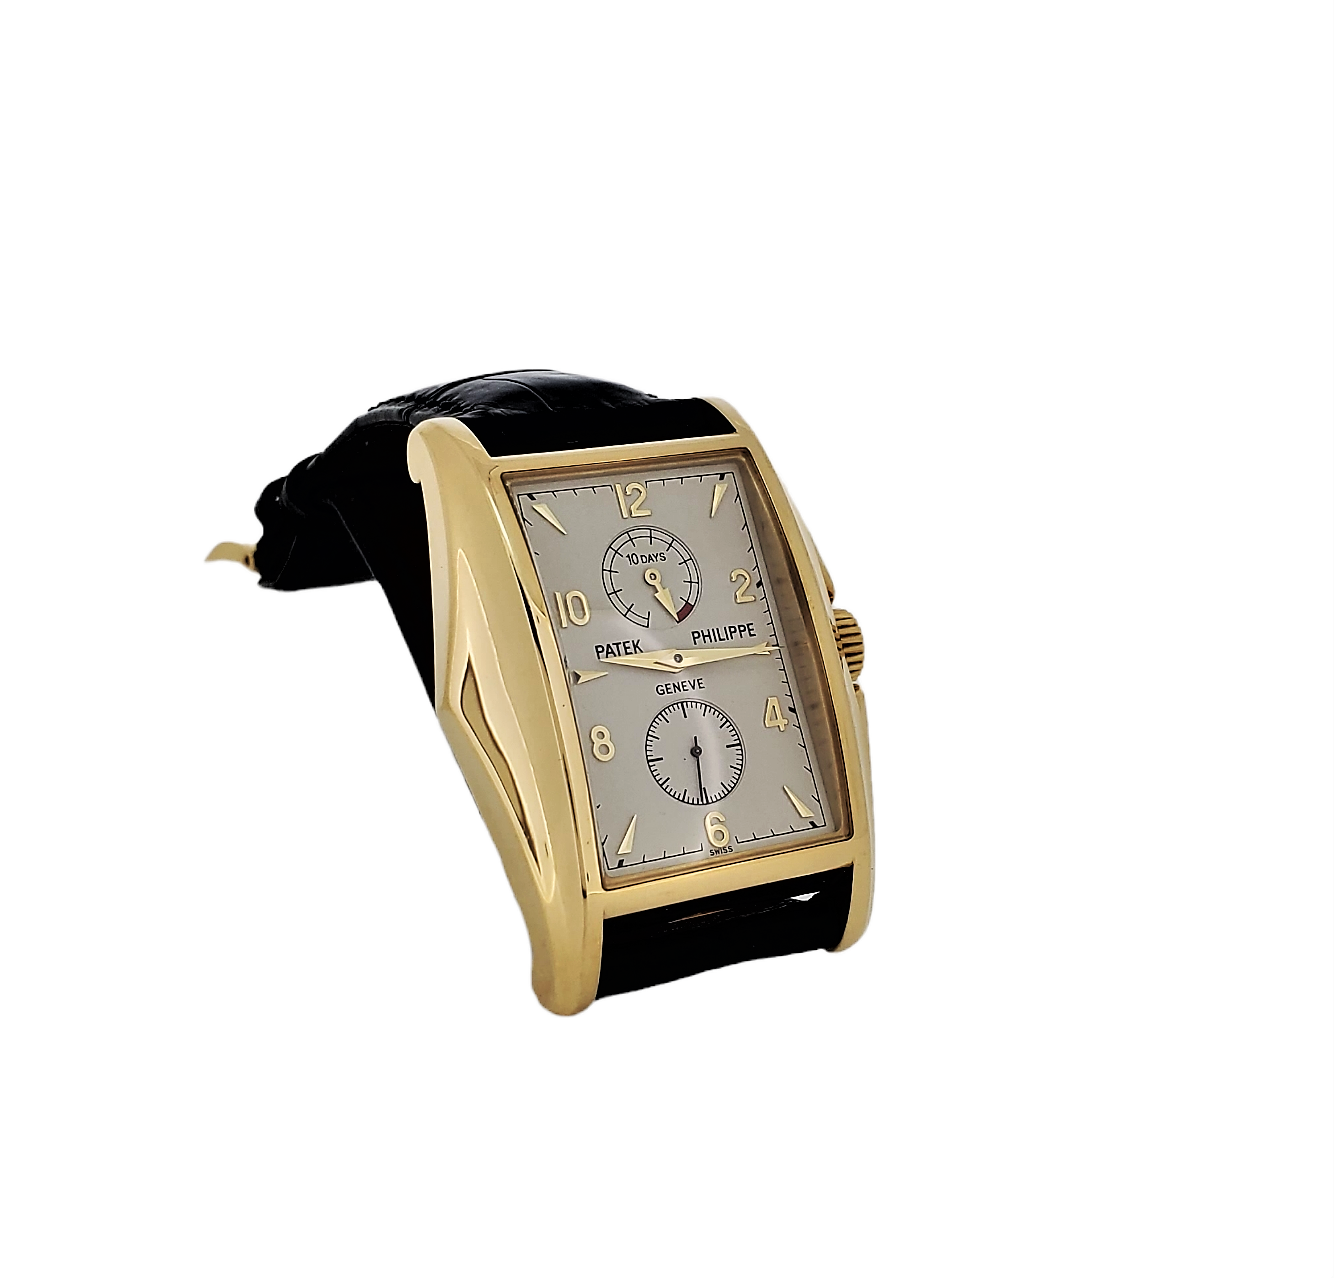 Sonata Nf1013ym15 Men's Watch in Bangalore at best price by Titan Company  Ltd (Corporate Office) - Justdial